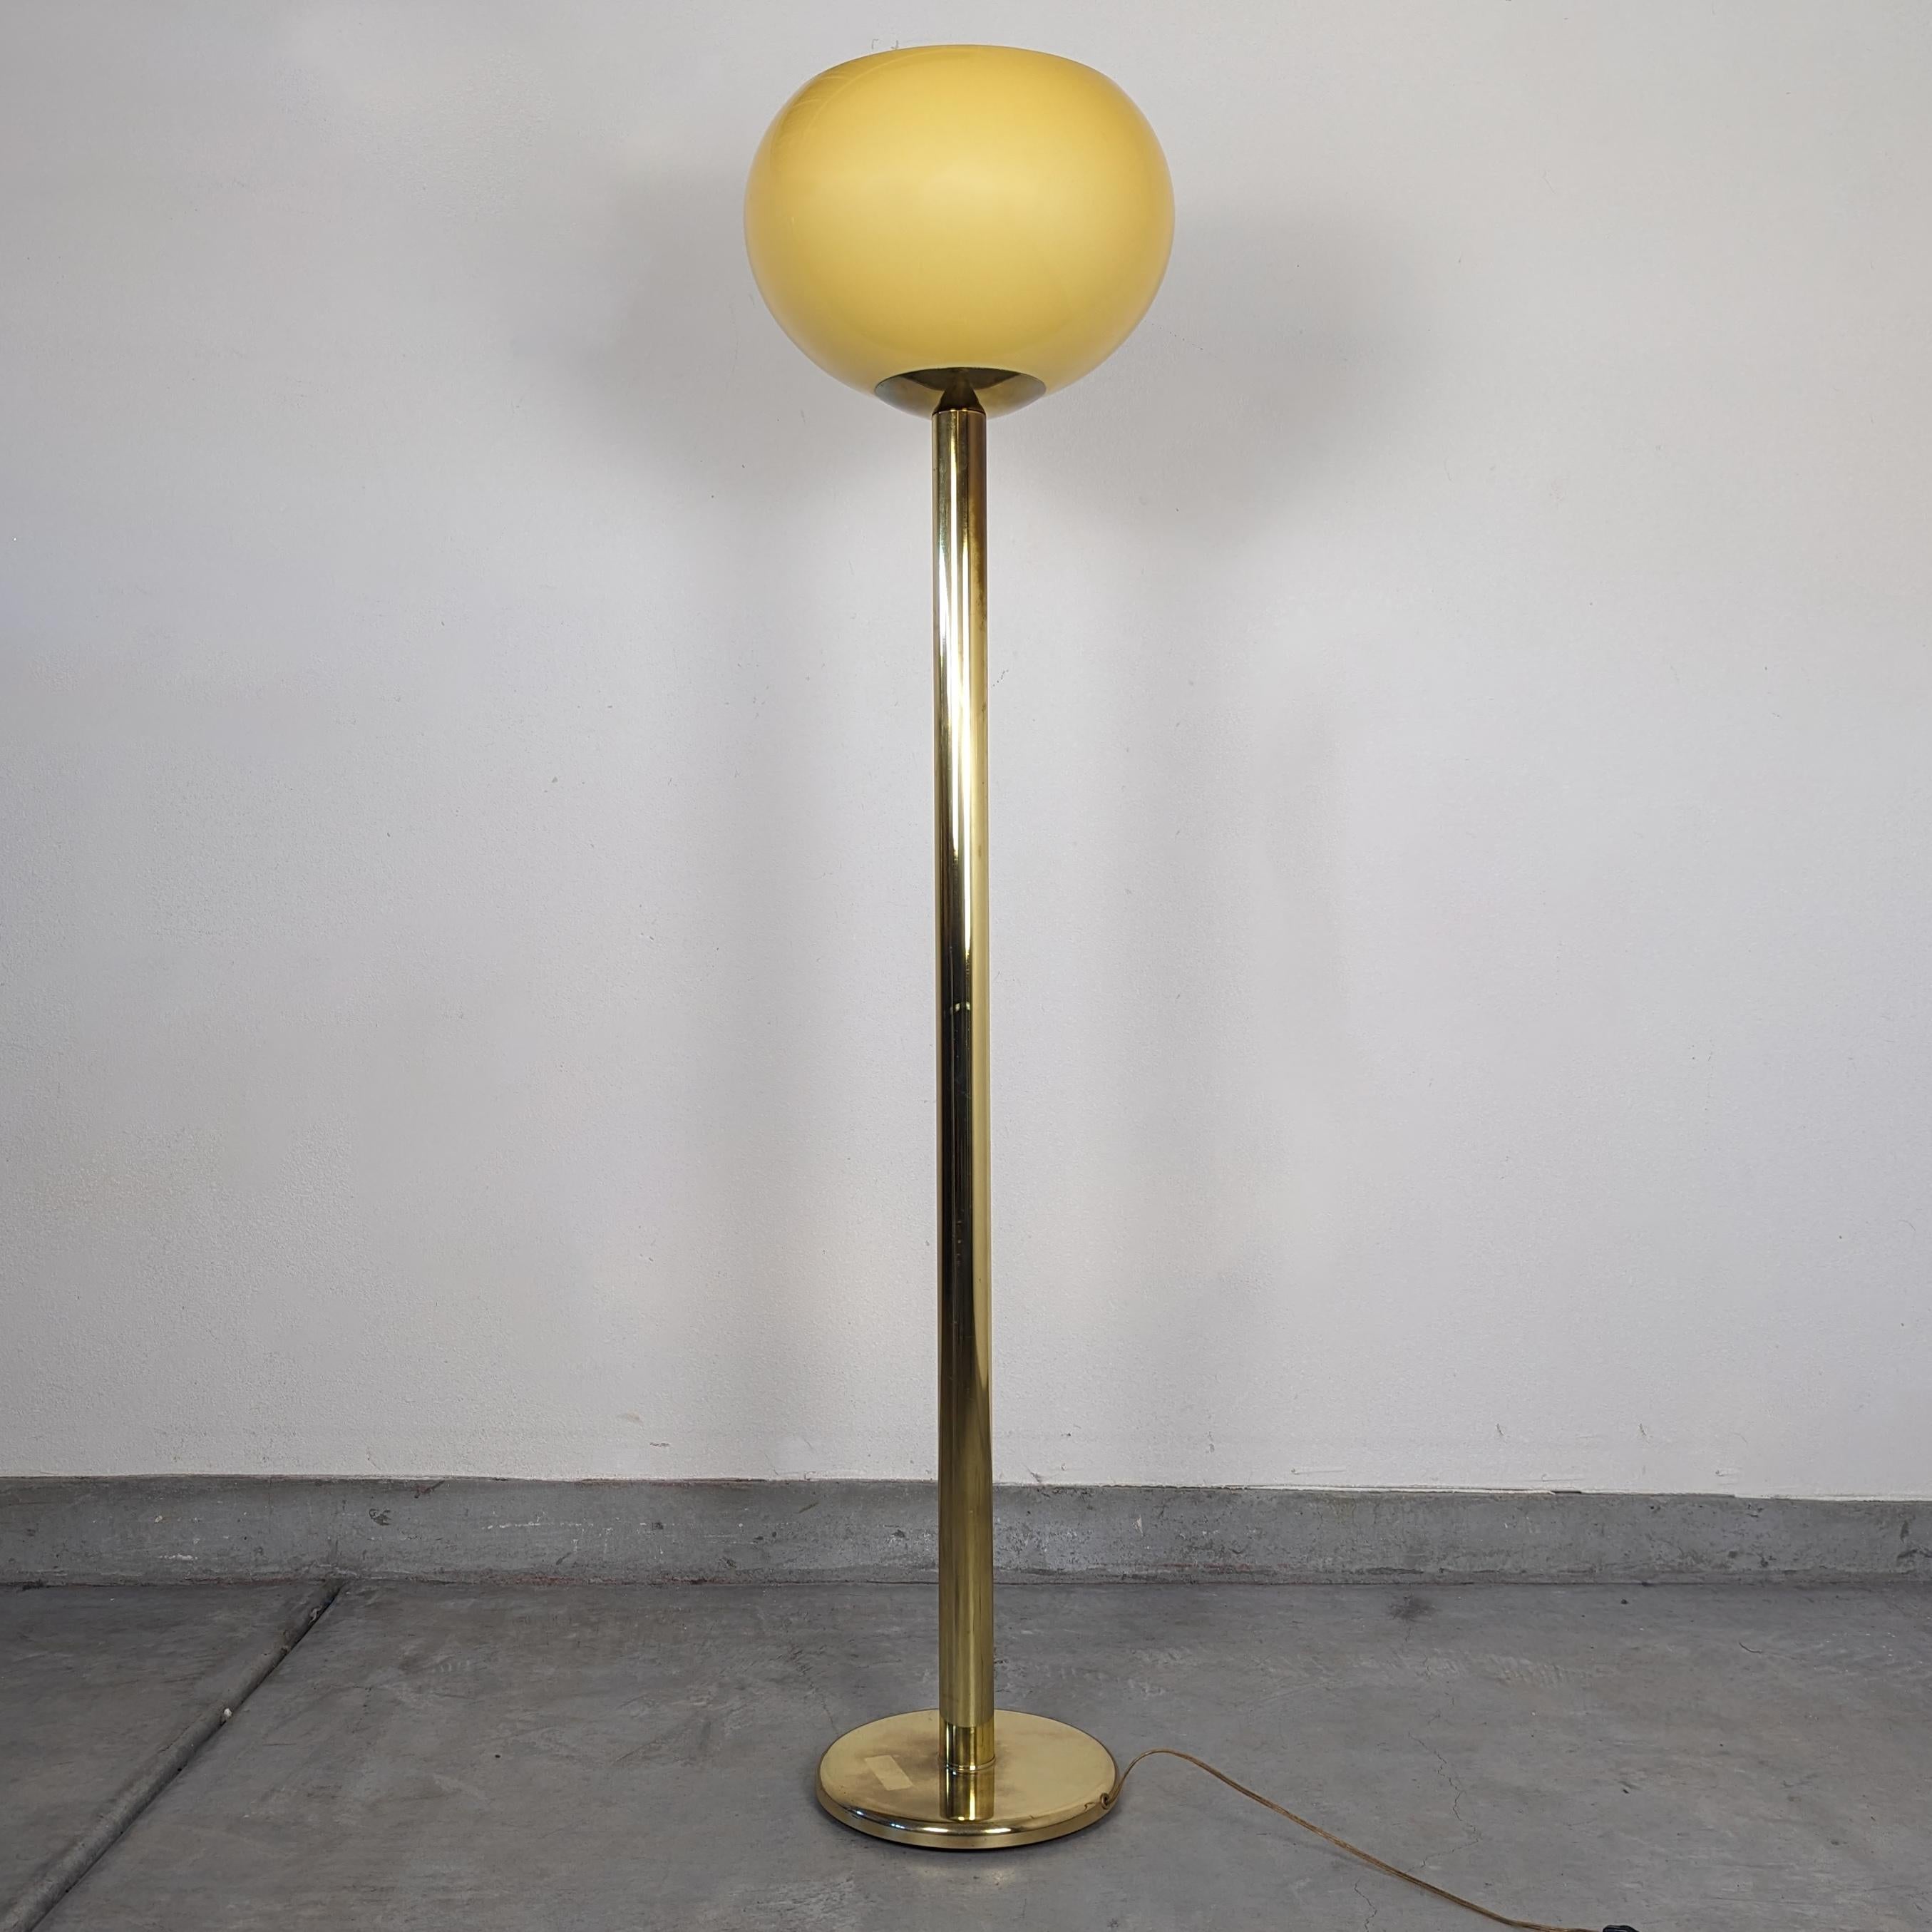 Step back in time and illuminate your space with the timeless elegance of this vintage brass floor lamp by the esteemed Rainbow Lamp Company, circa 1980s. Standing at an impressive 61 inches tall, this lamp boasts a slender profile body that exudes